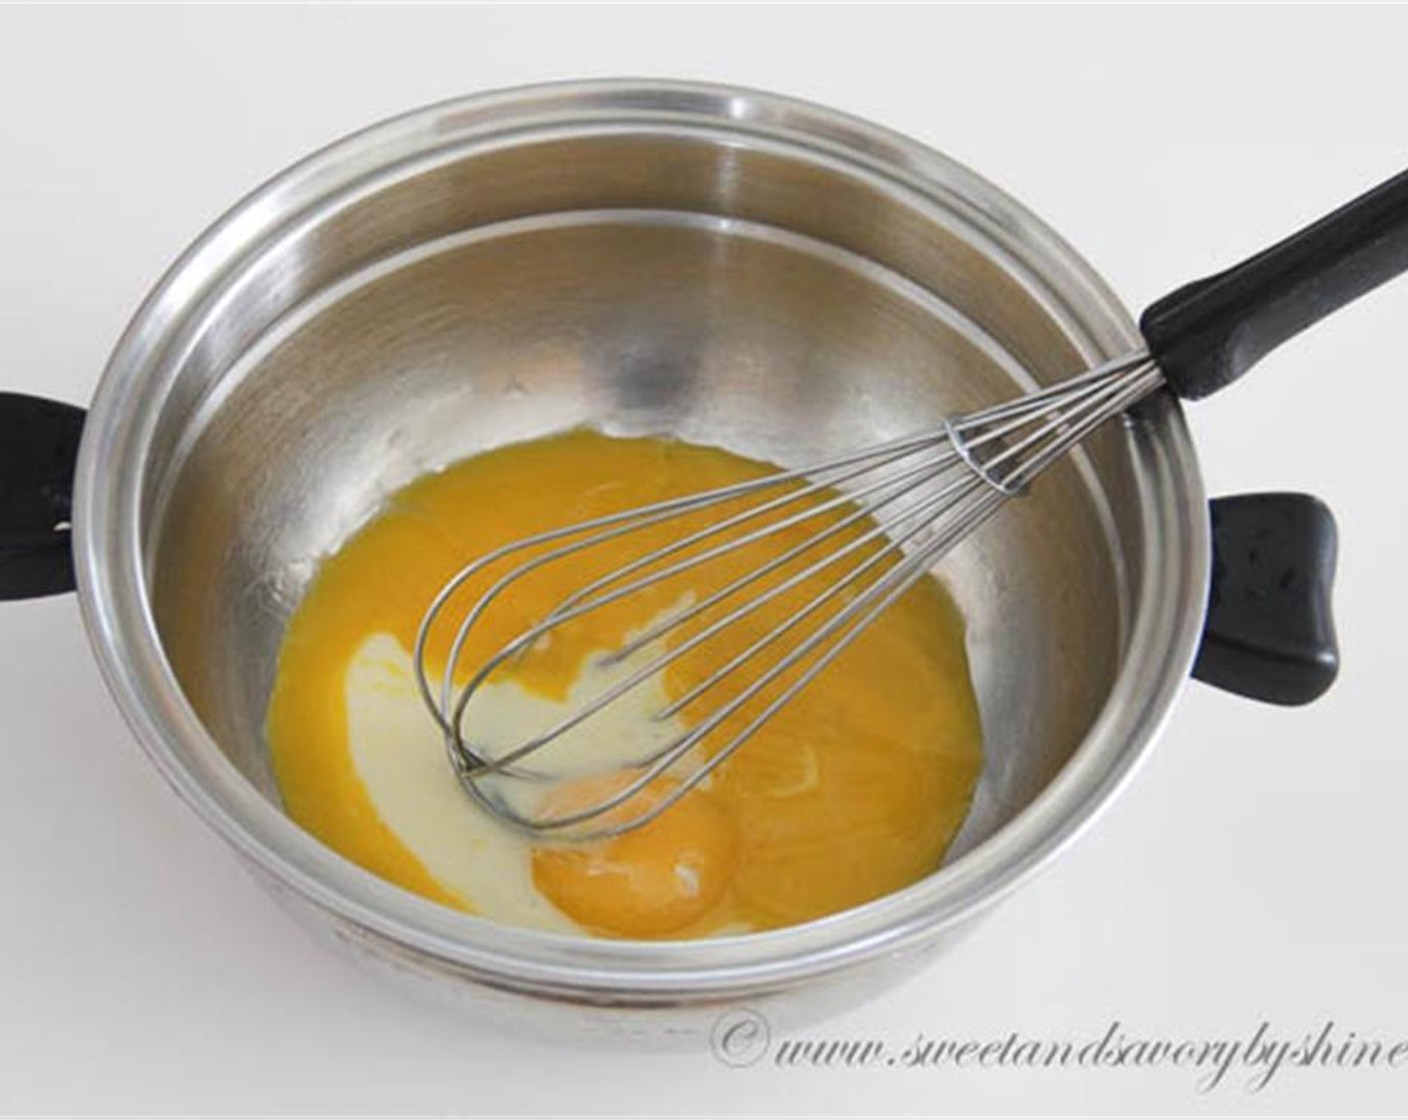 step 2 In a medium bowl, beat the yolks of the Eggs (4) and remaining Sweetened Condensed Milk (1/4 cup) until pale.